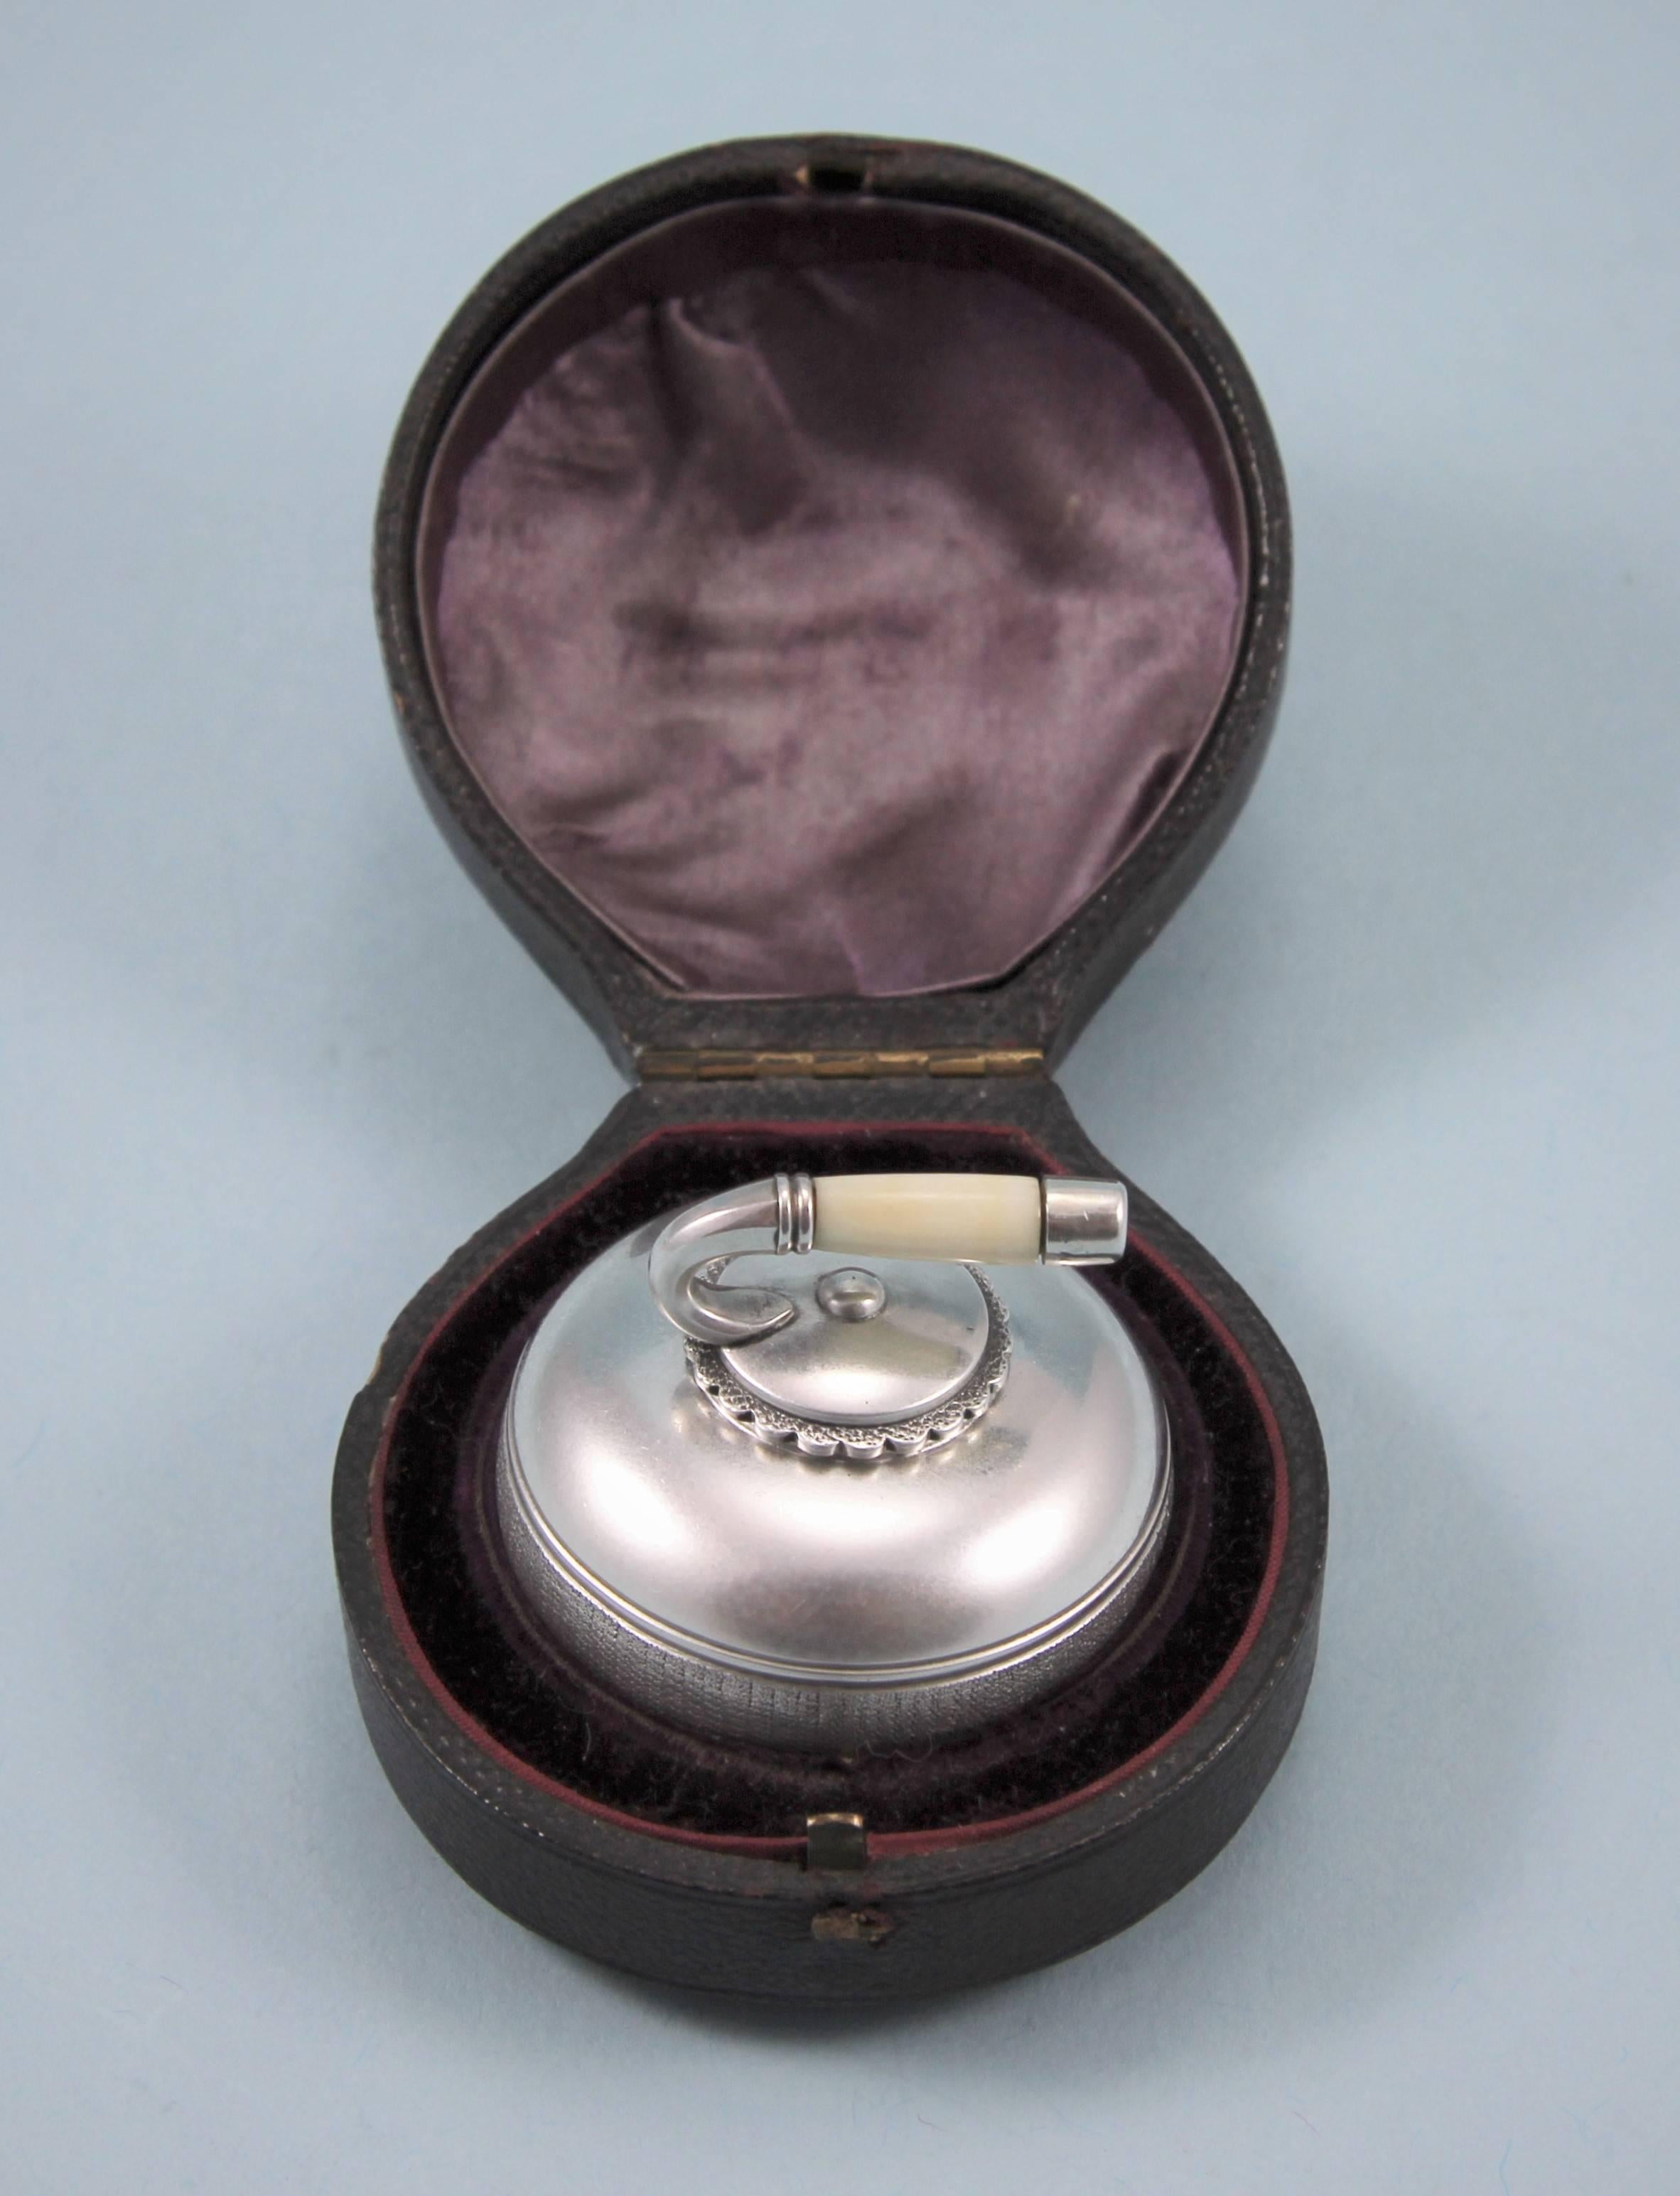 Amusing Victorian cased novelty box in the form of a curling stone with a silver and ivory handle.
Maker: Fenton Brothers. Sheffield, 1884.

The lid opens with a bayonet motion and the inside of the lid is clearly hallmarked with the maker's